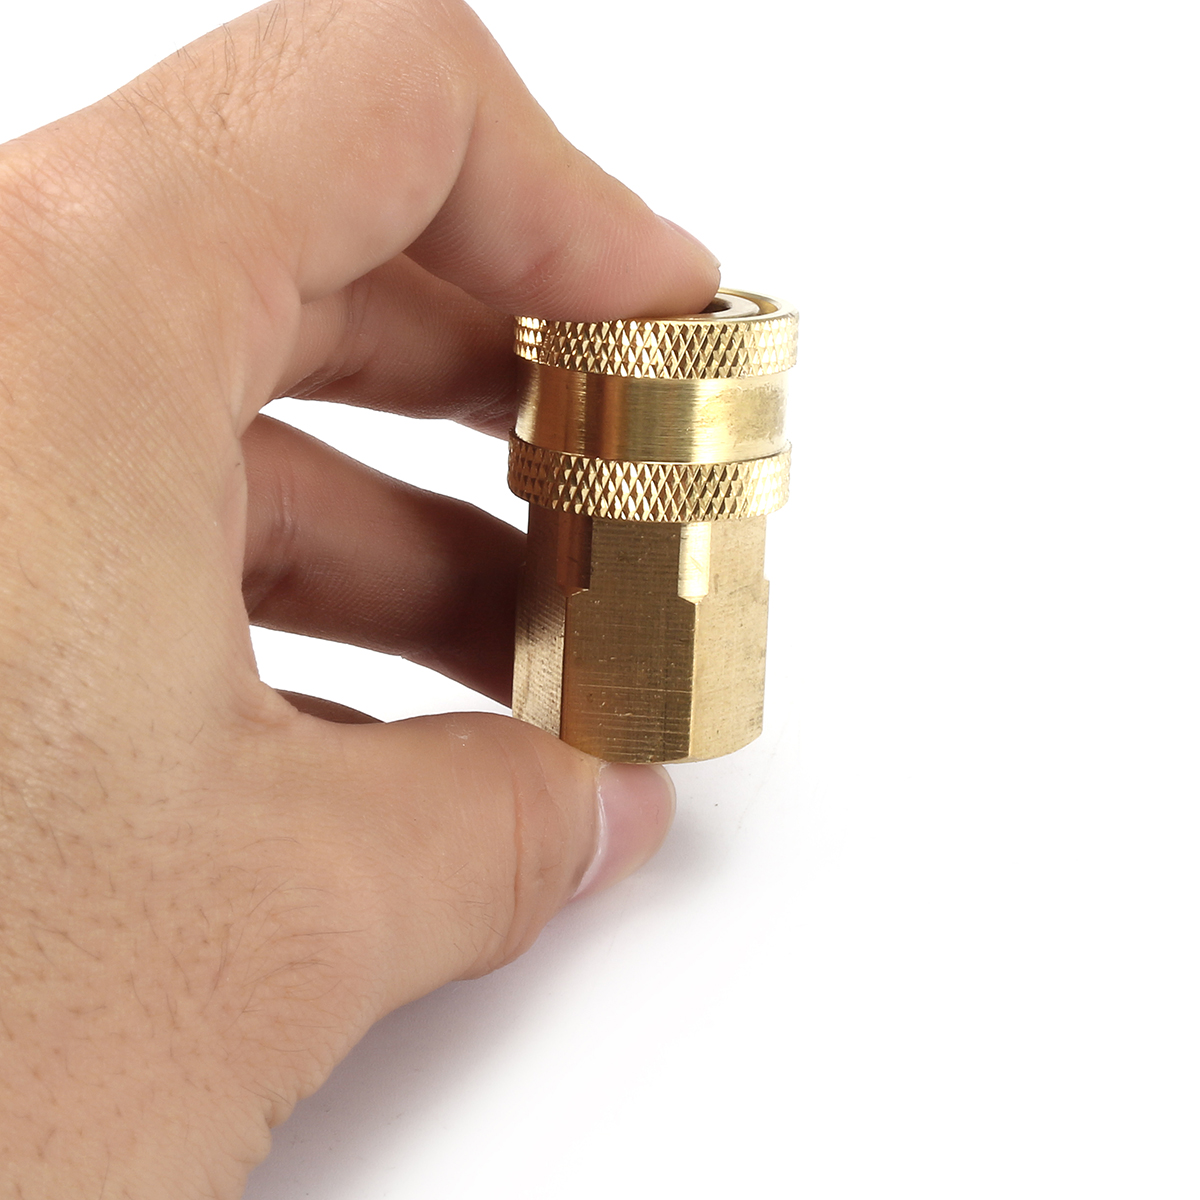 Pressure-Washer-14quot-Female-NPT-Brass-Quick-Connect-Adapter-Coupler-for-Cleaning-1522090